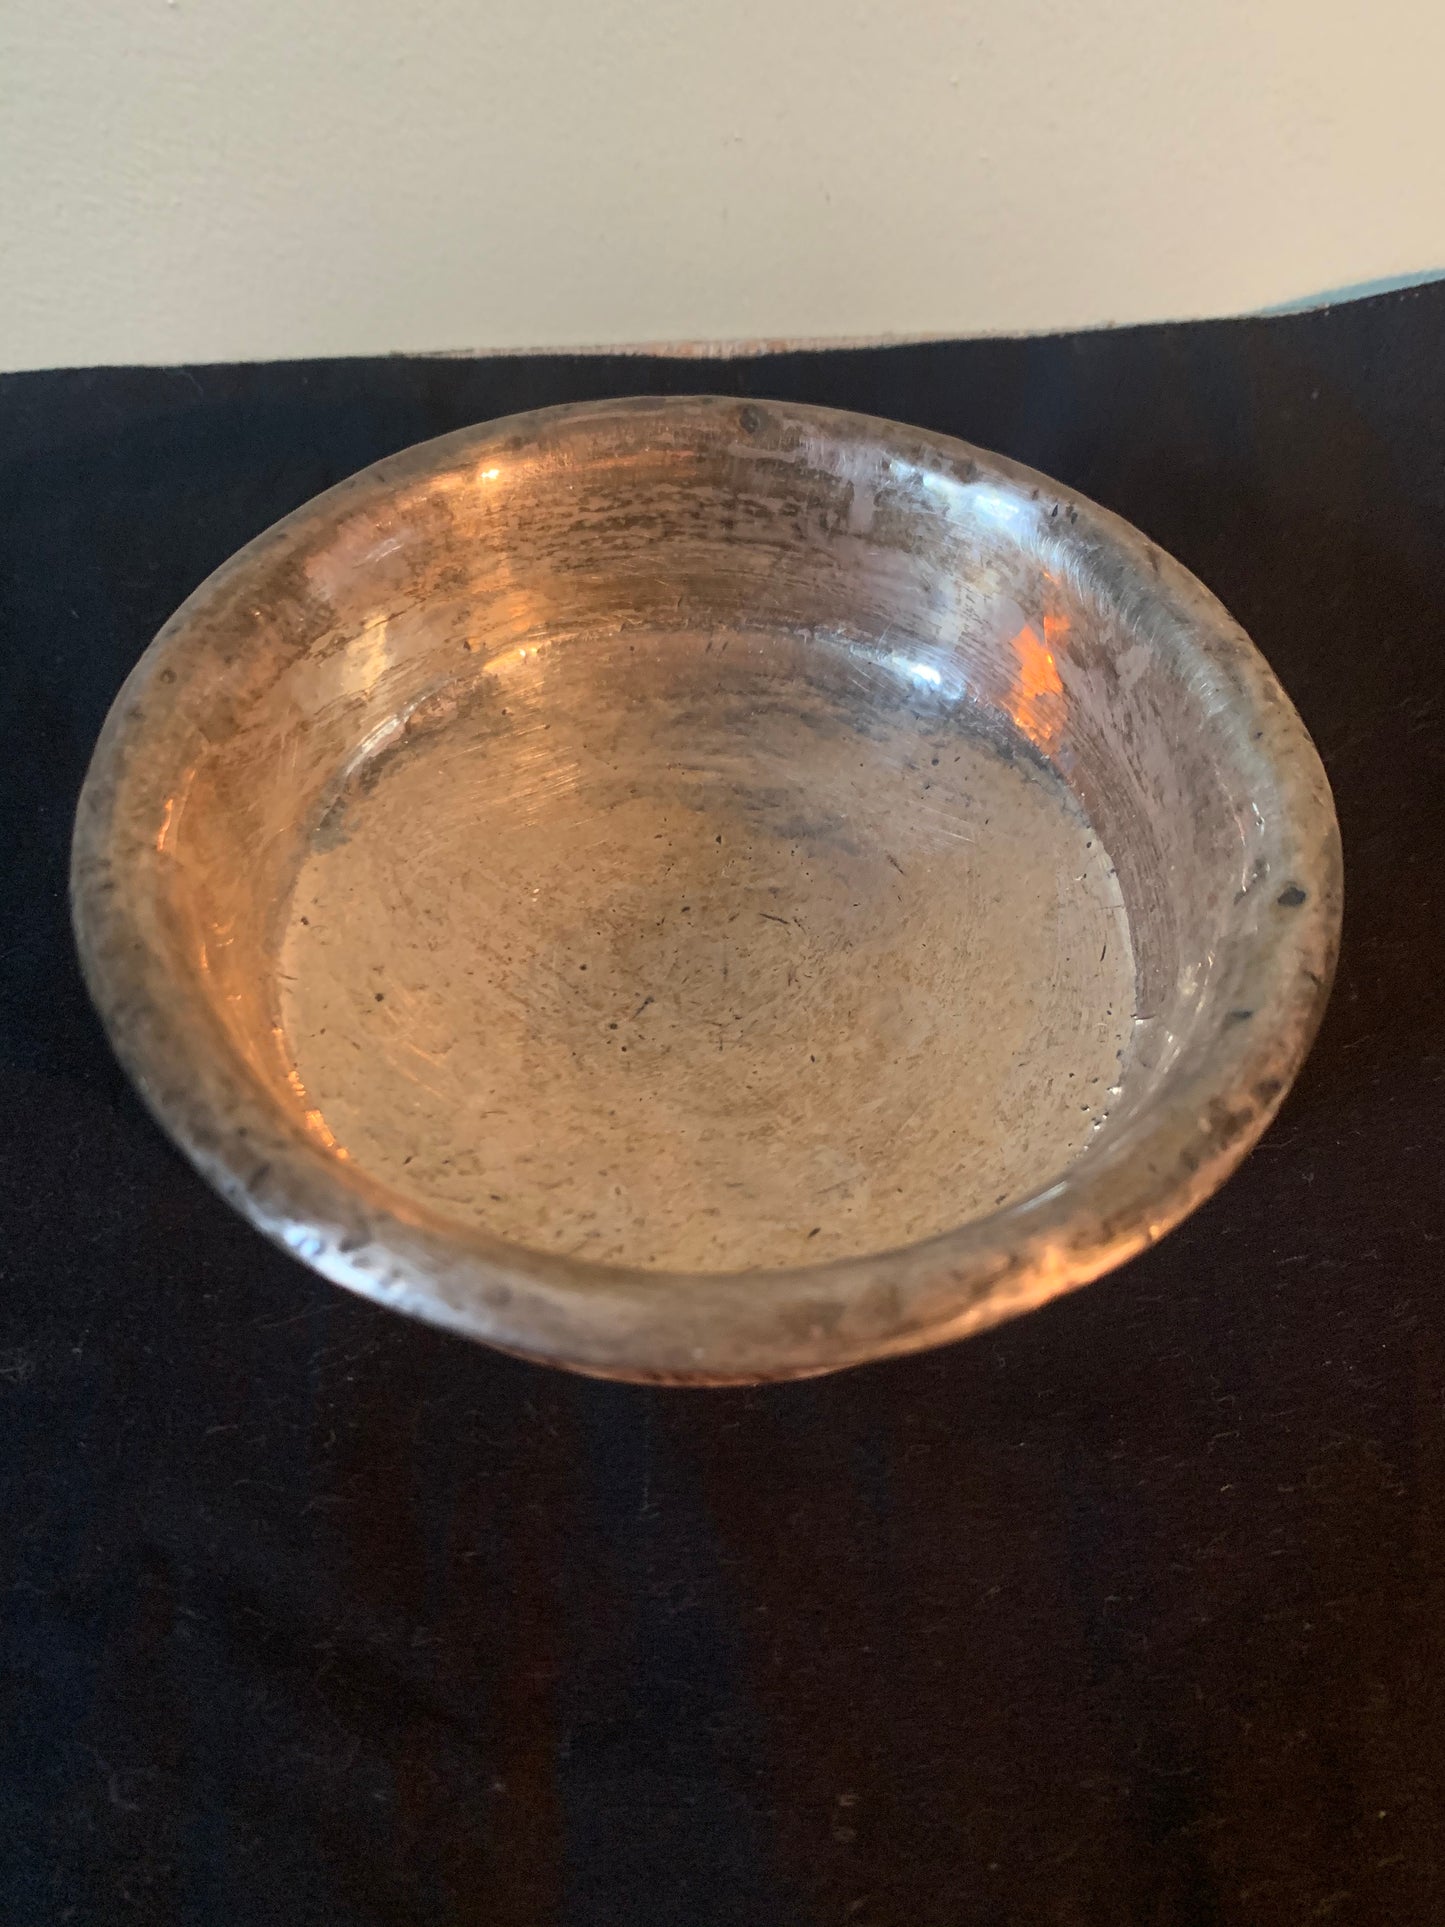 Vintage Tibetan bowl with silver inner lining